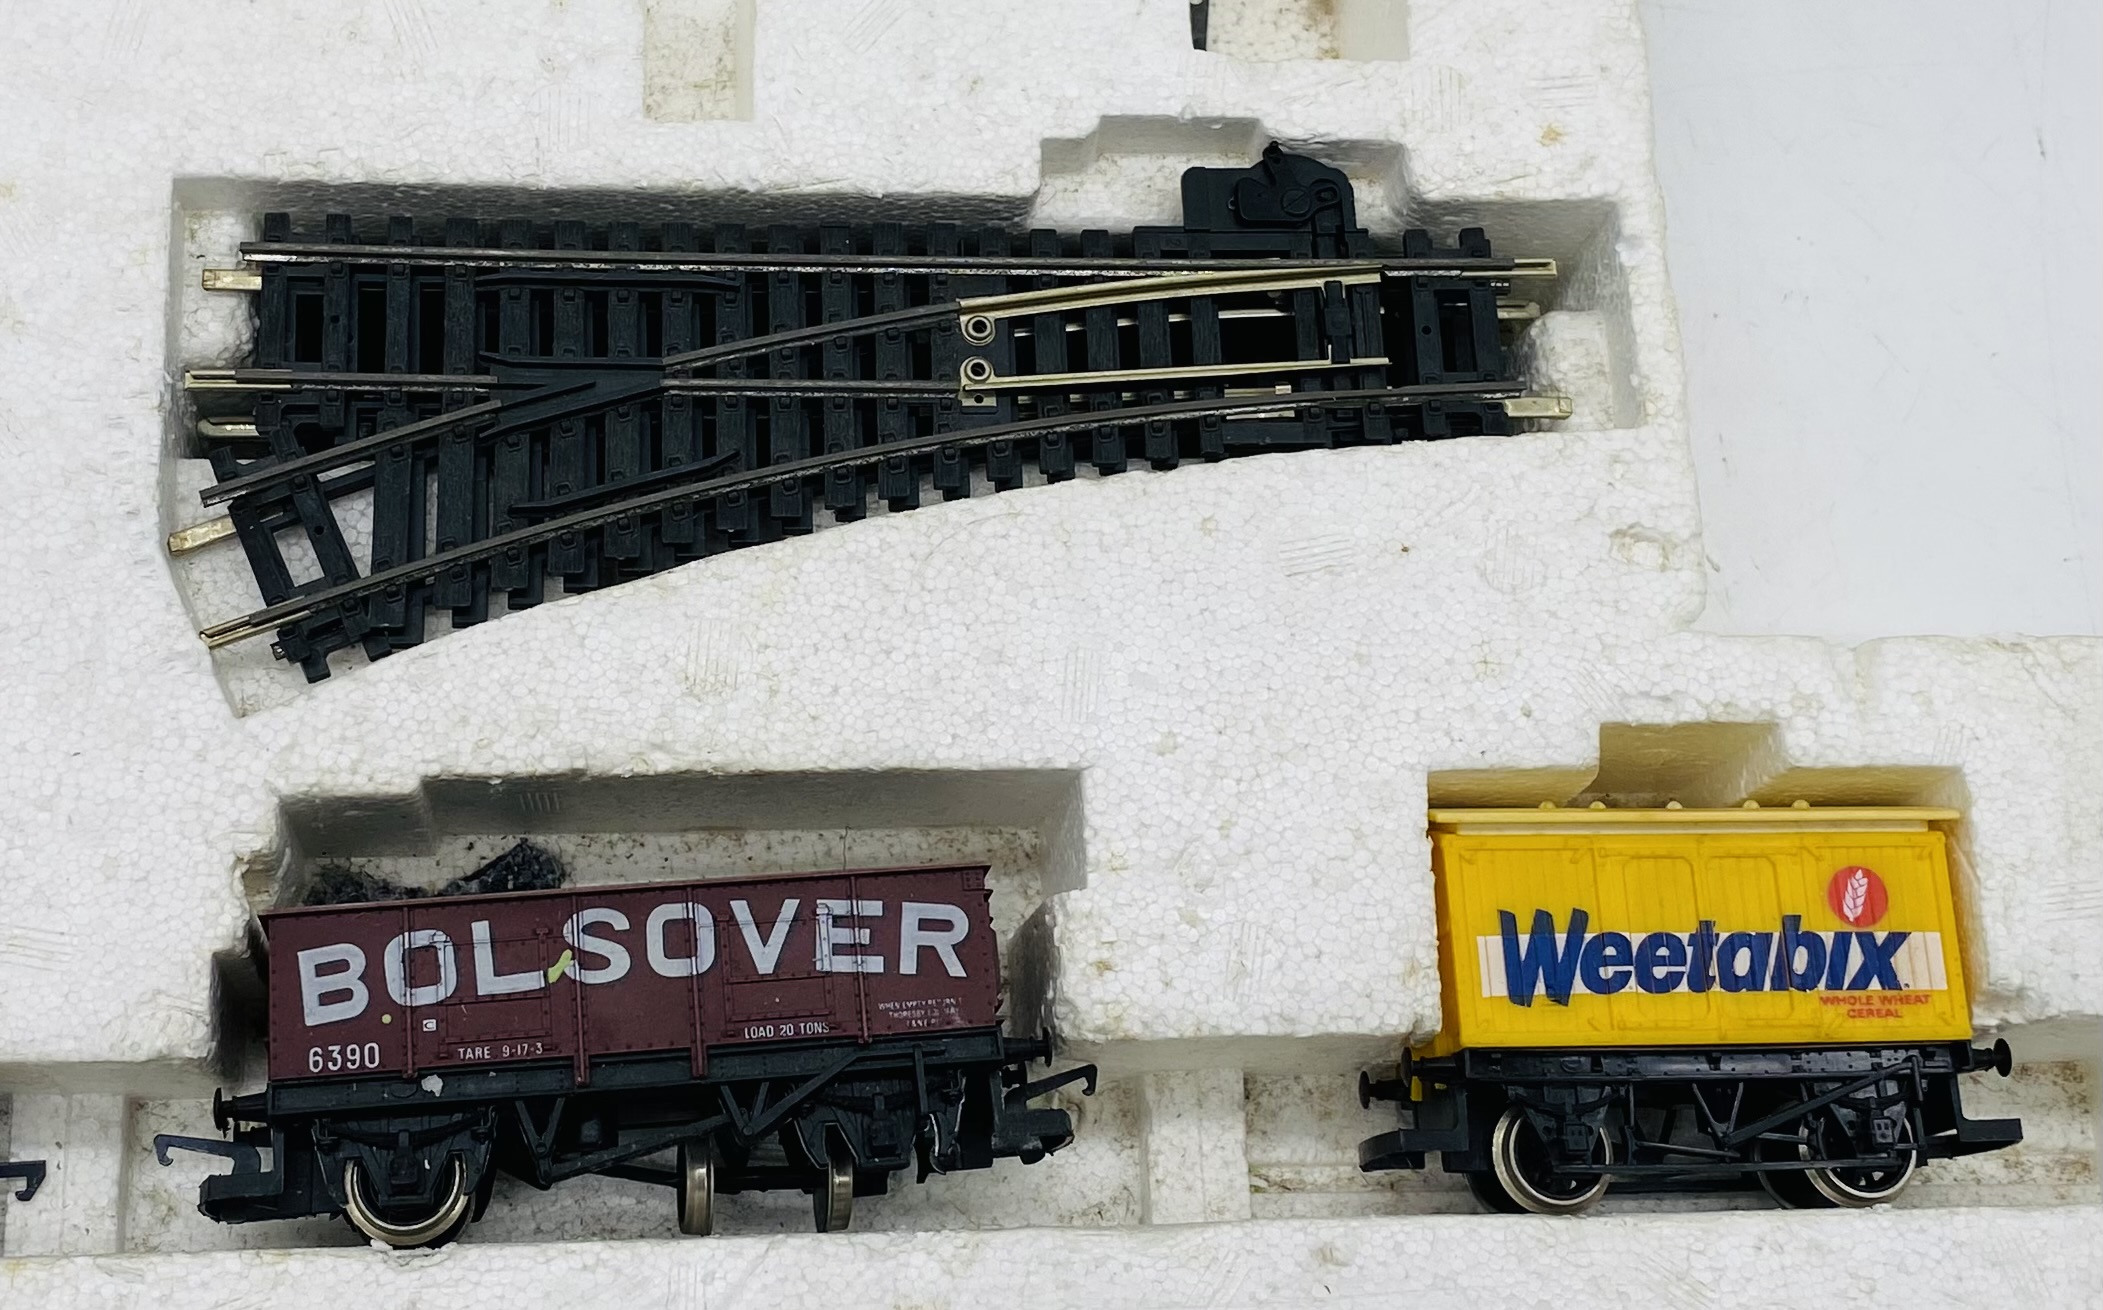 A collection of model railway OO gauge rolling stock, carriages, track and single locomotive. - Image 7 of 7